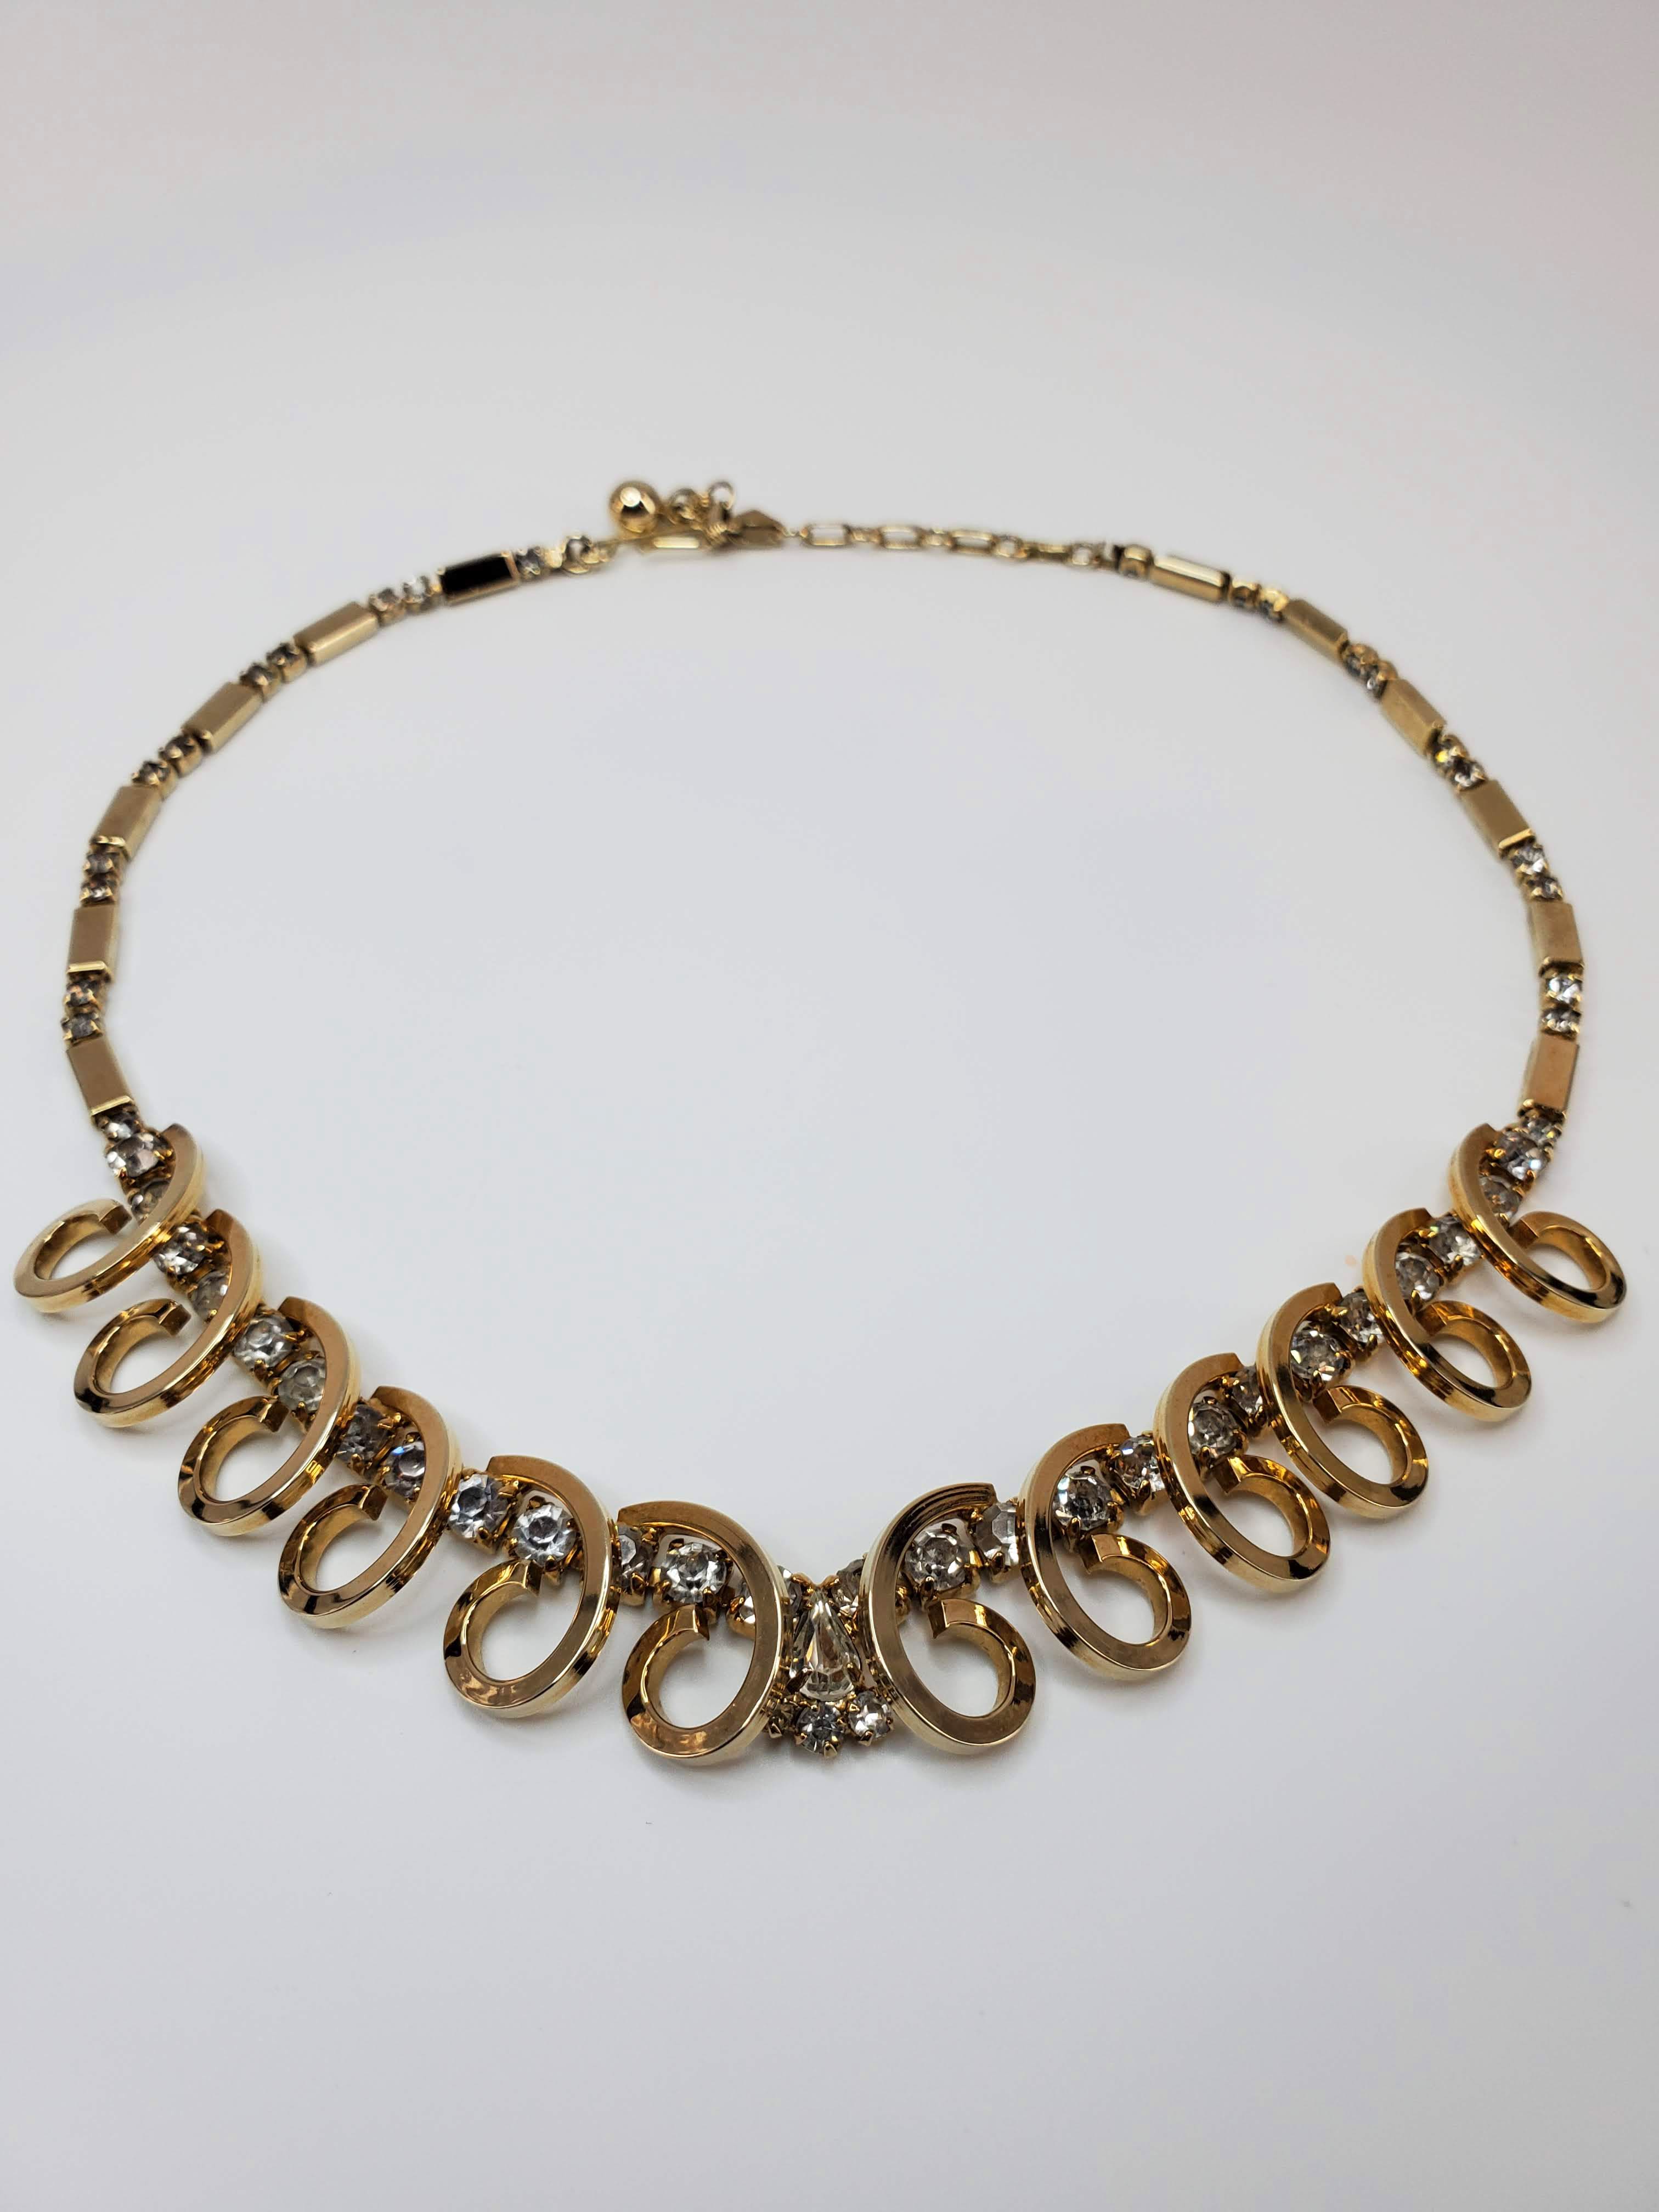 1977 Sarah Coventry Goddess Gold Tone Necklace | USA – Hers and His  Treasures